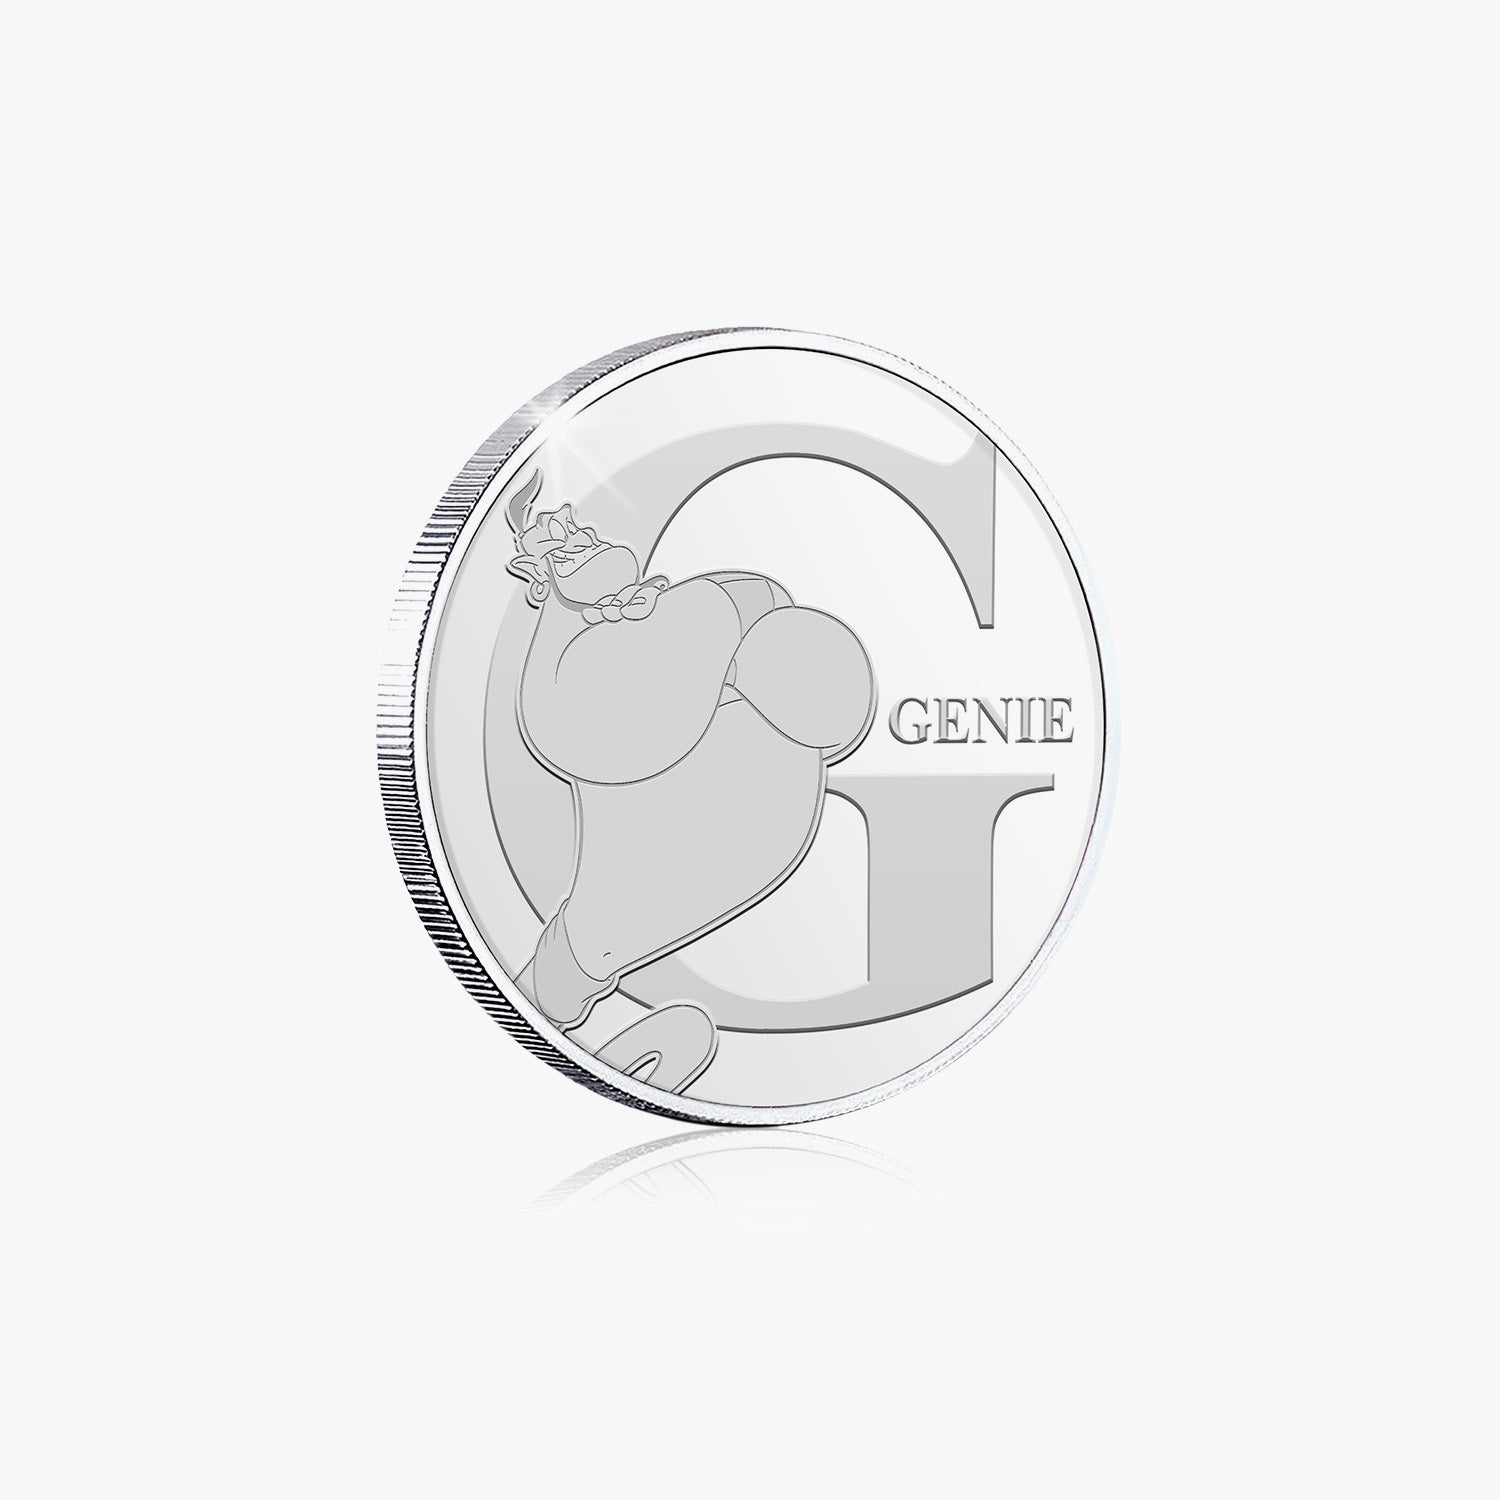 G is for Genie Silver-Plated Commemorative